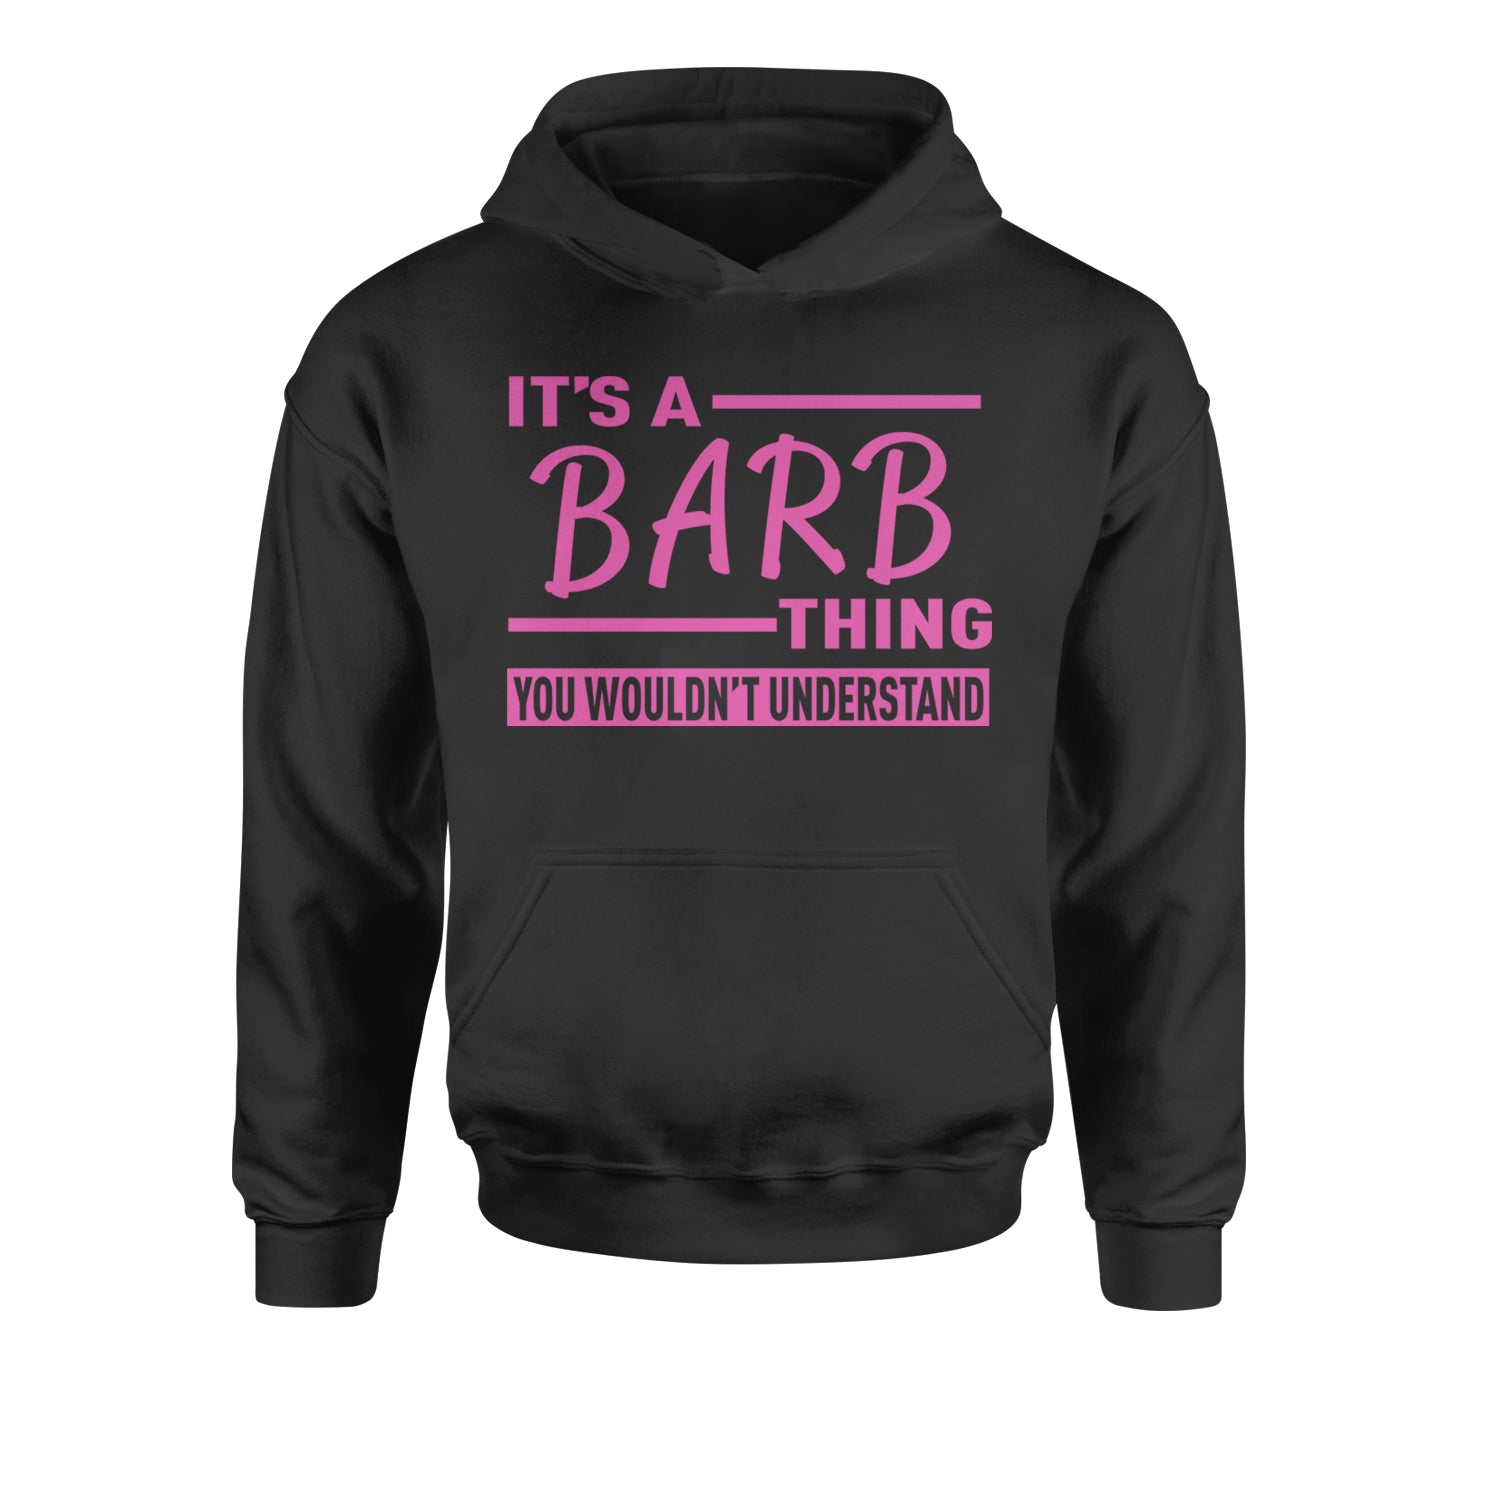 It's A Barb Thing, You Wouldn't Understand Youth-Sized Hoodie